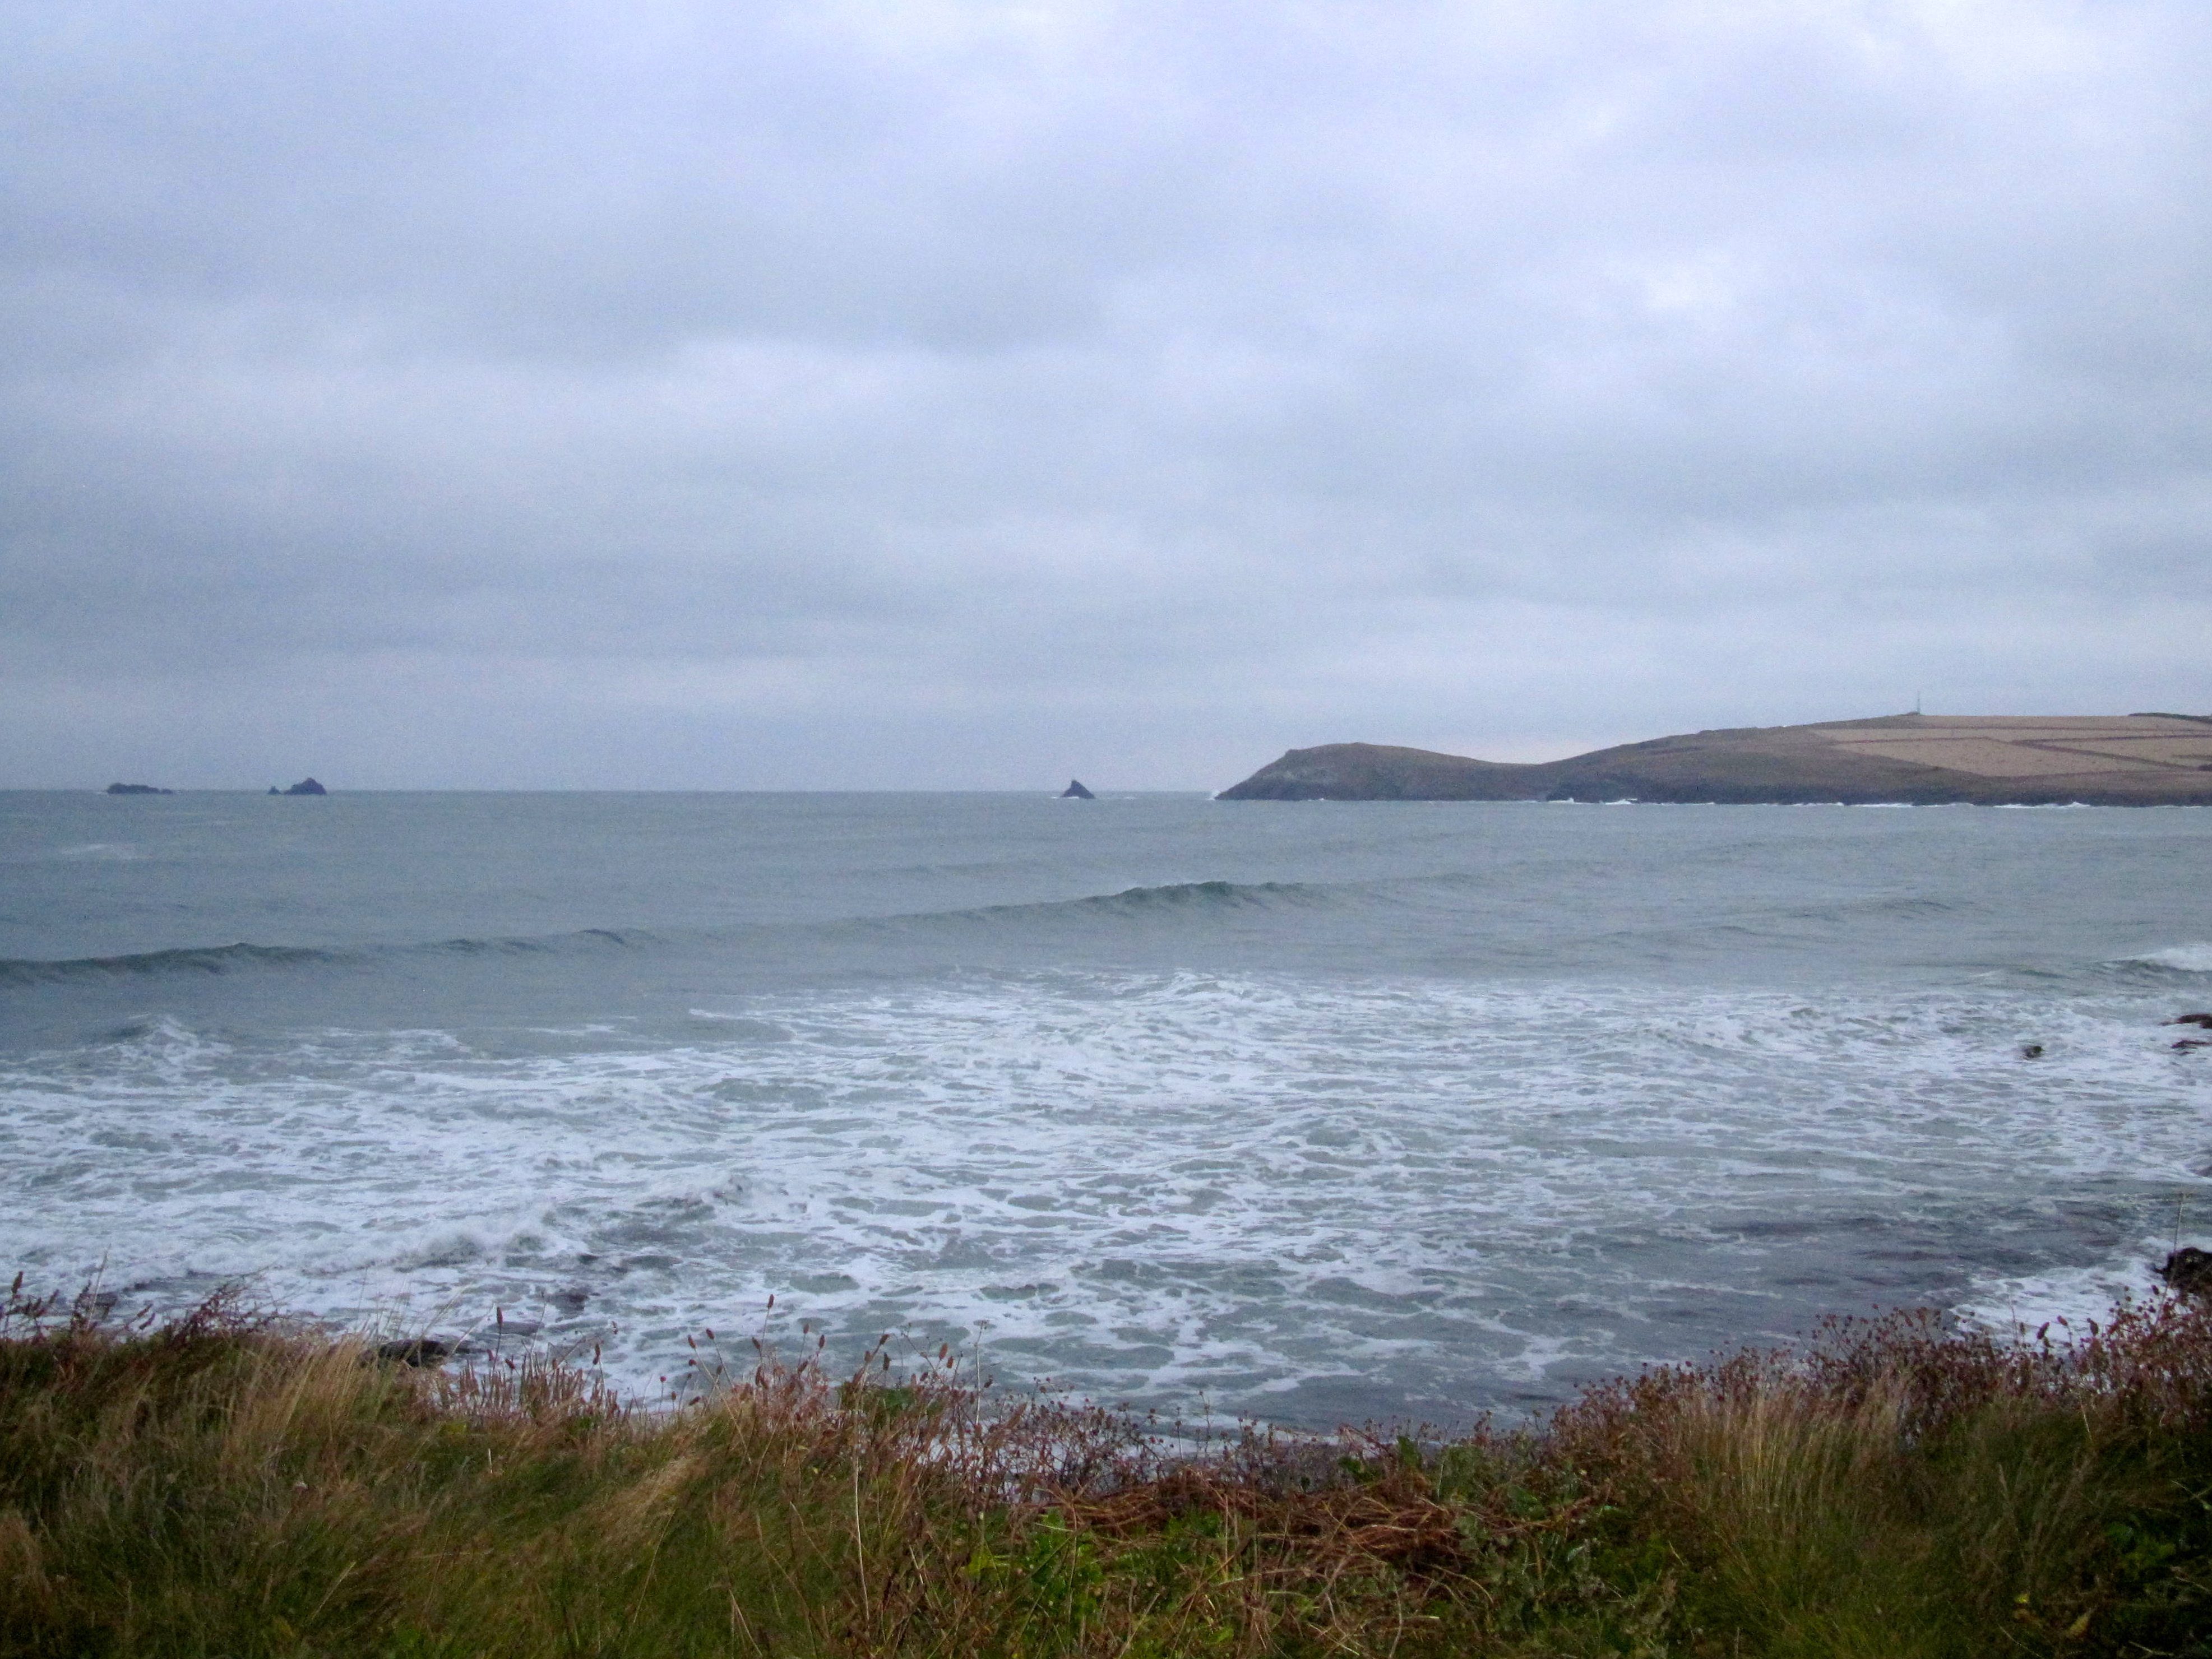 Surf Report for Wednesday 27th August 2014